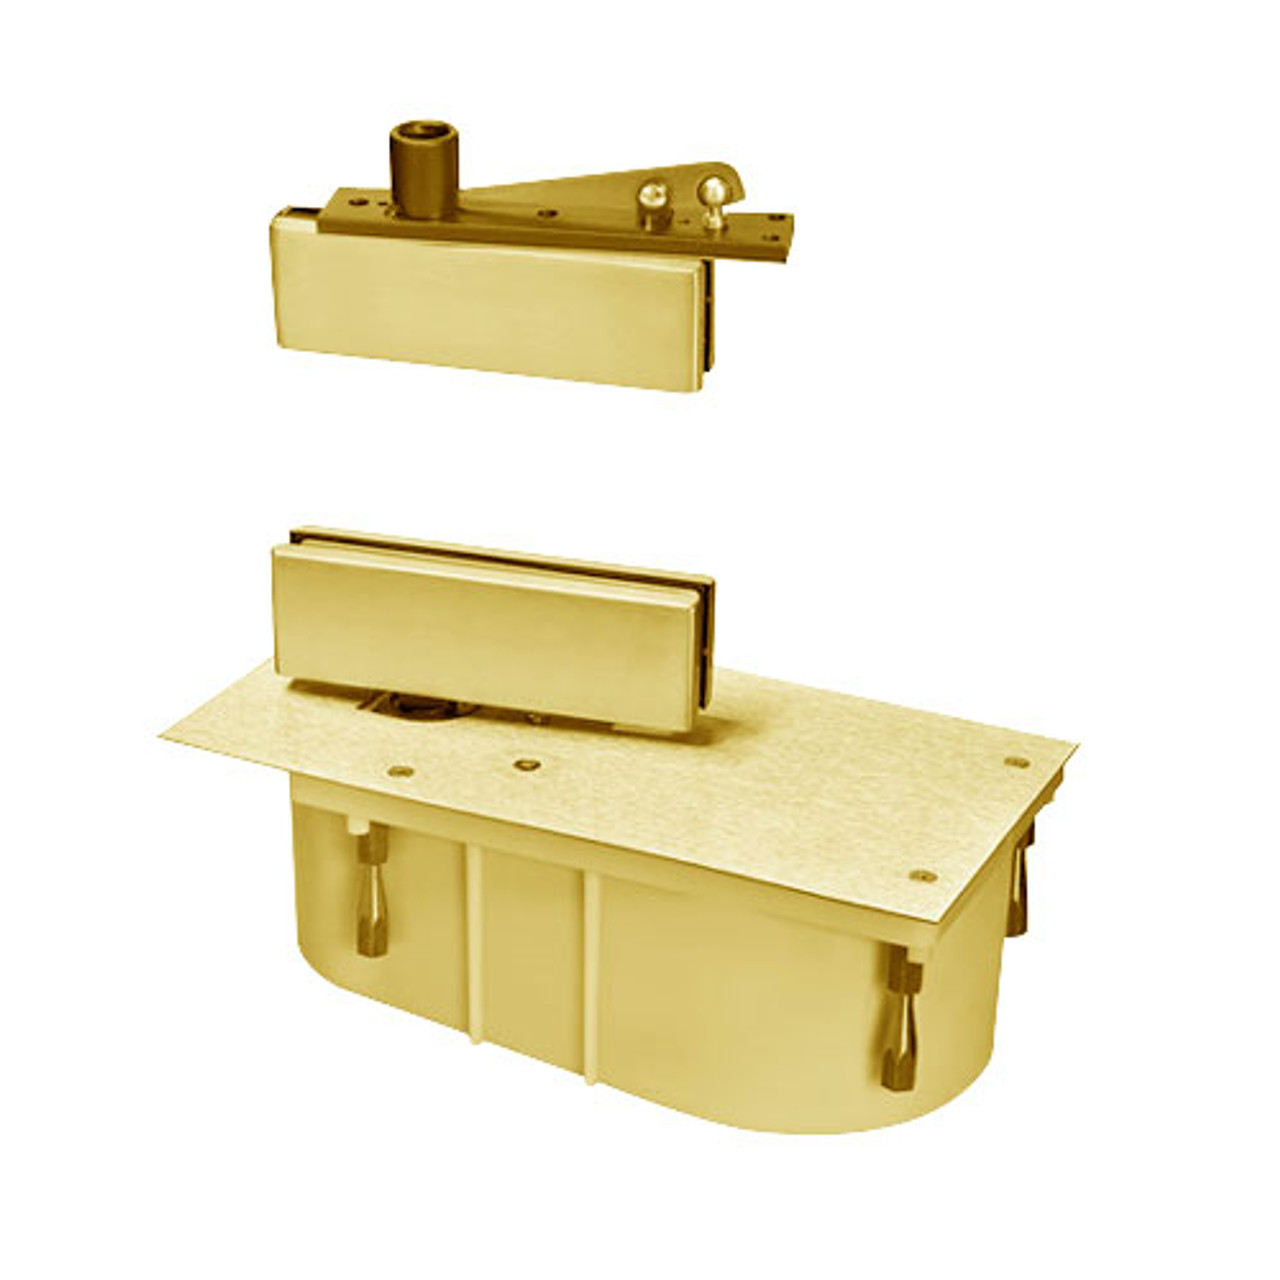 428-105S-LTP-RH-605 Rixson 428 Series Heavy Duty Single Acting Center Hung Floor Closer with Patch Fittings in Bright Brass Finish